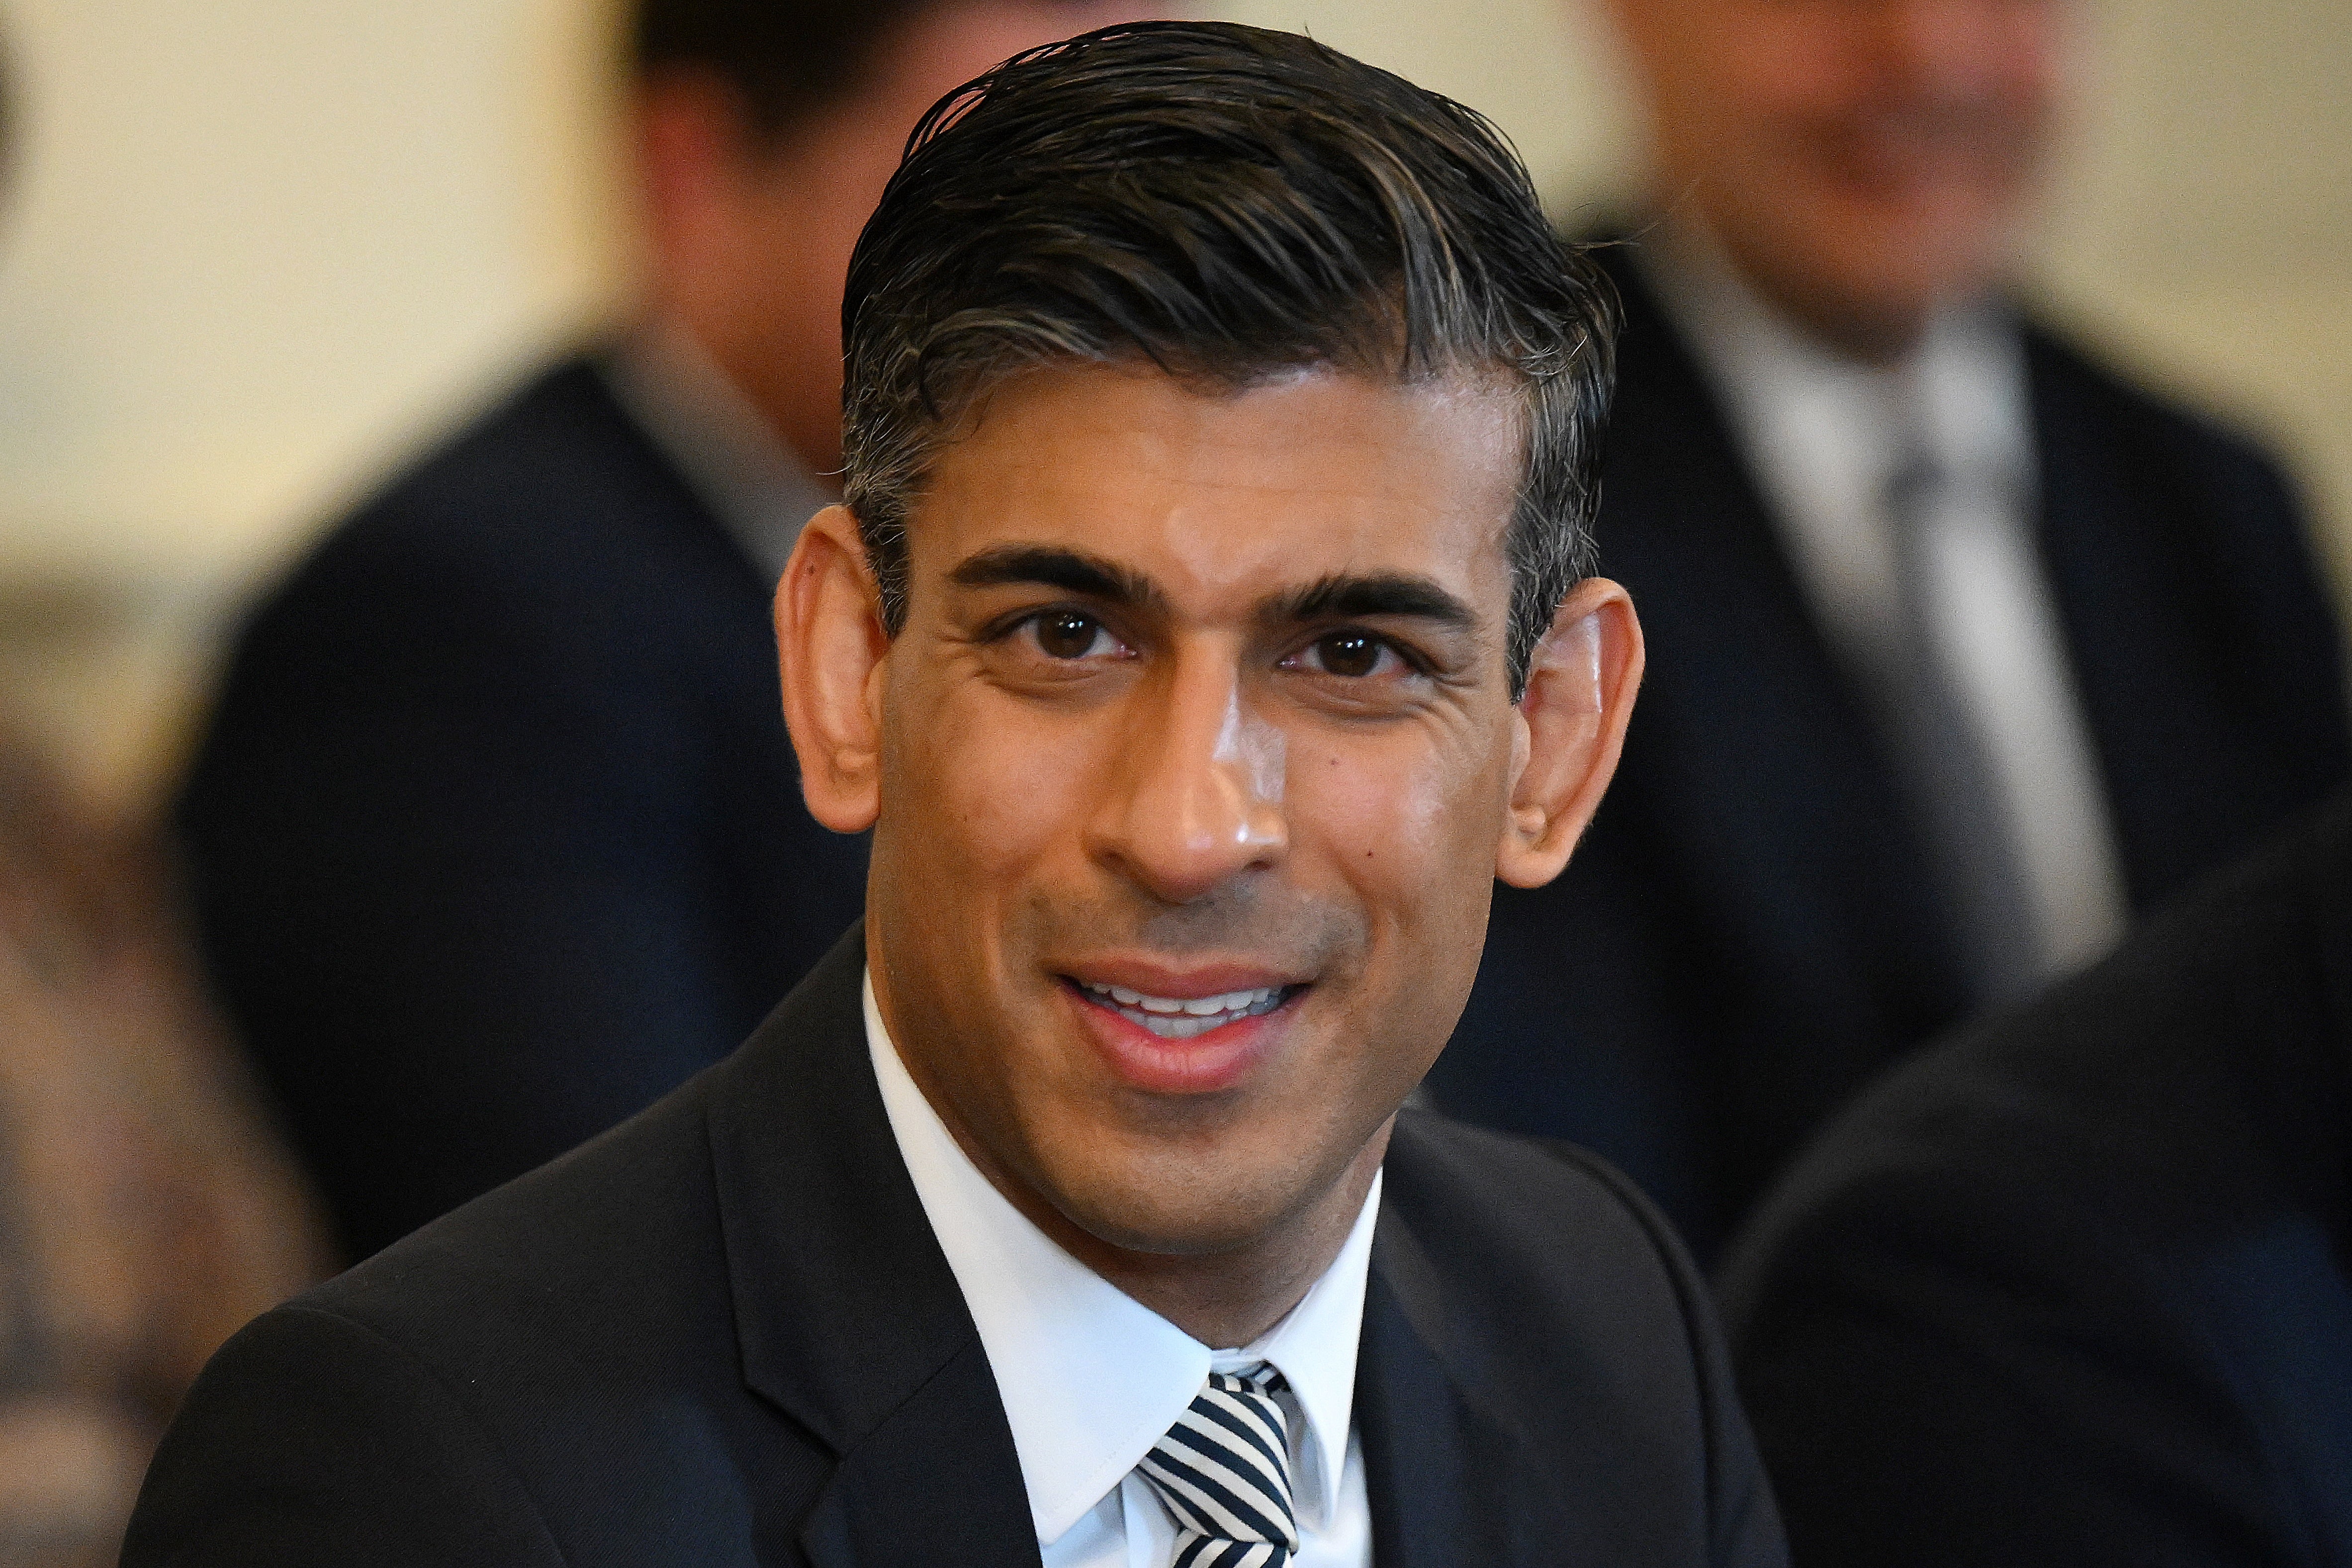 Rishi Sunak’s stock has fallen after revelations about his family’s wealth and tax status